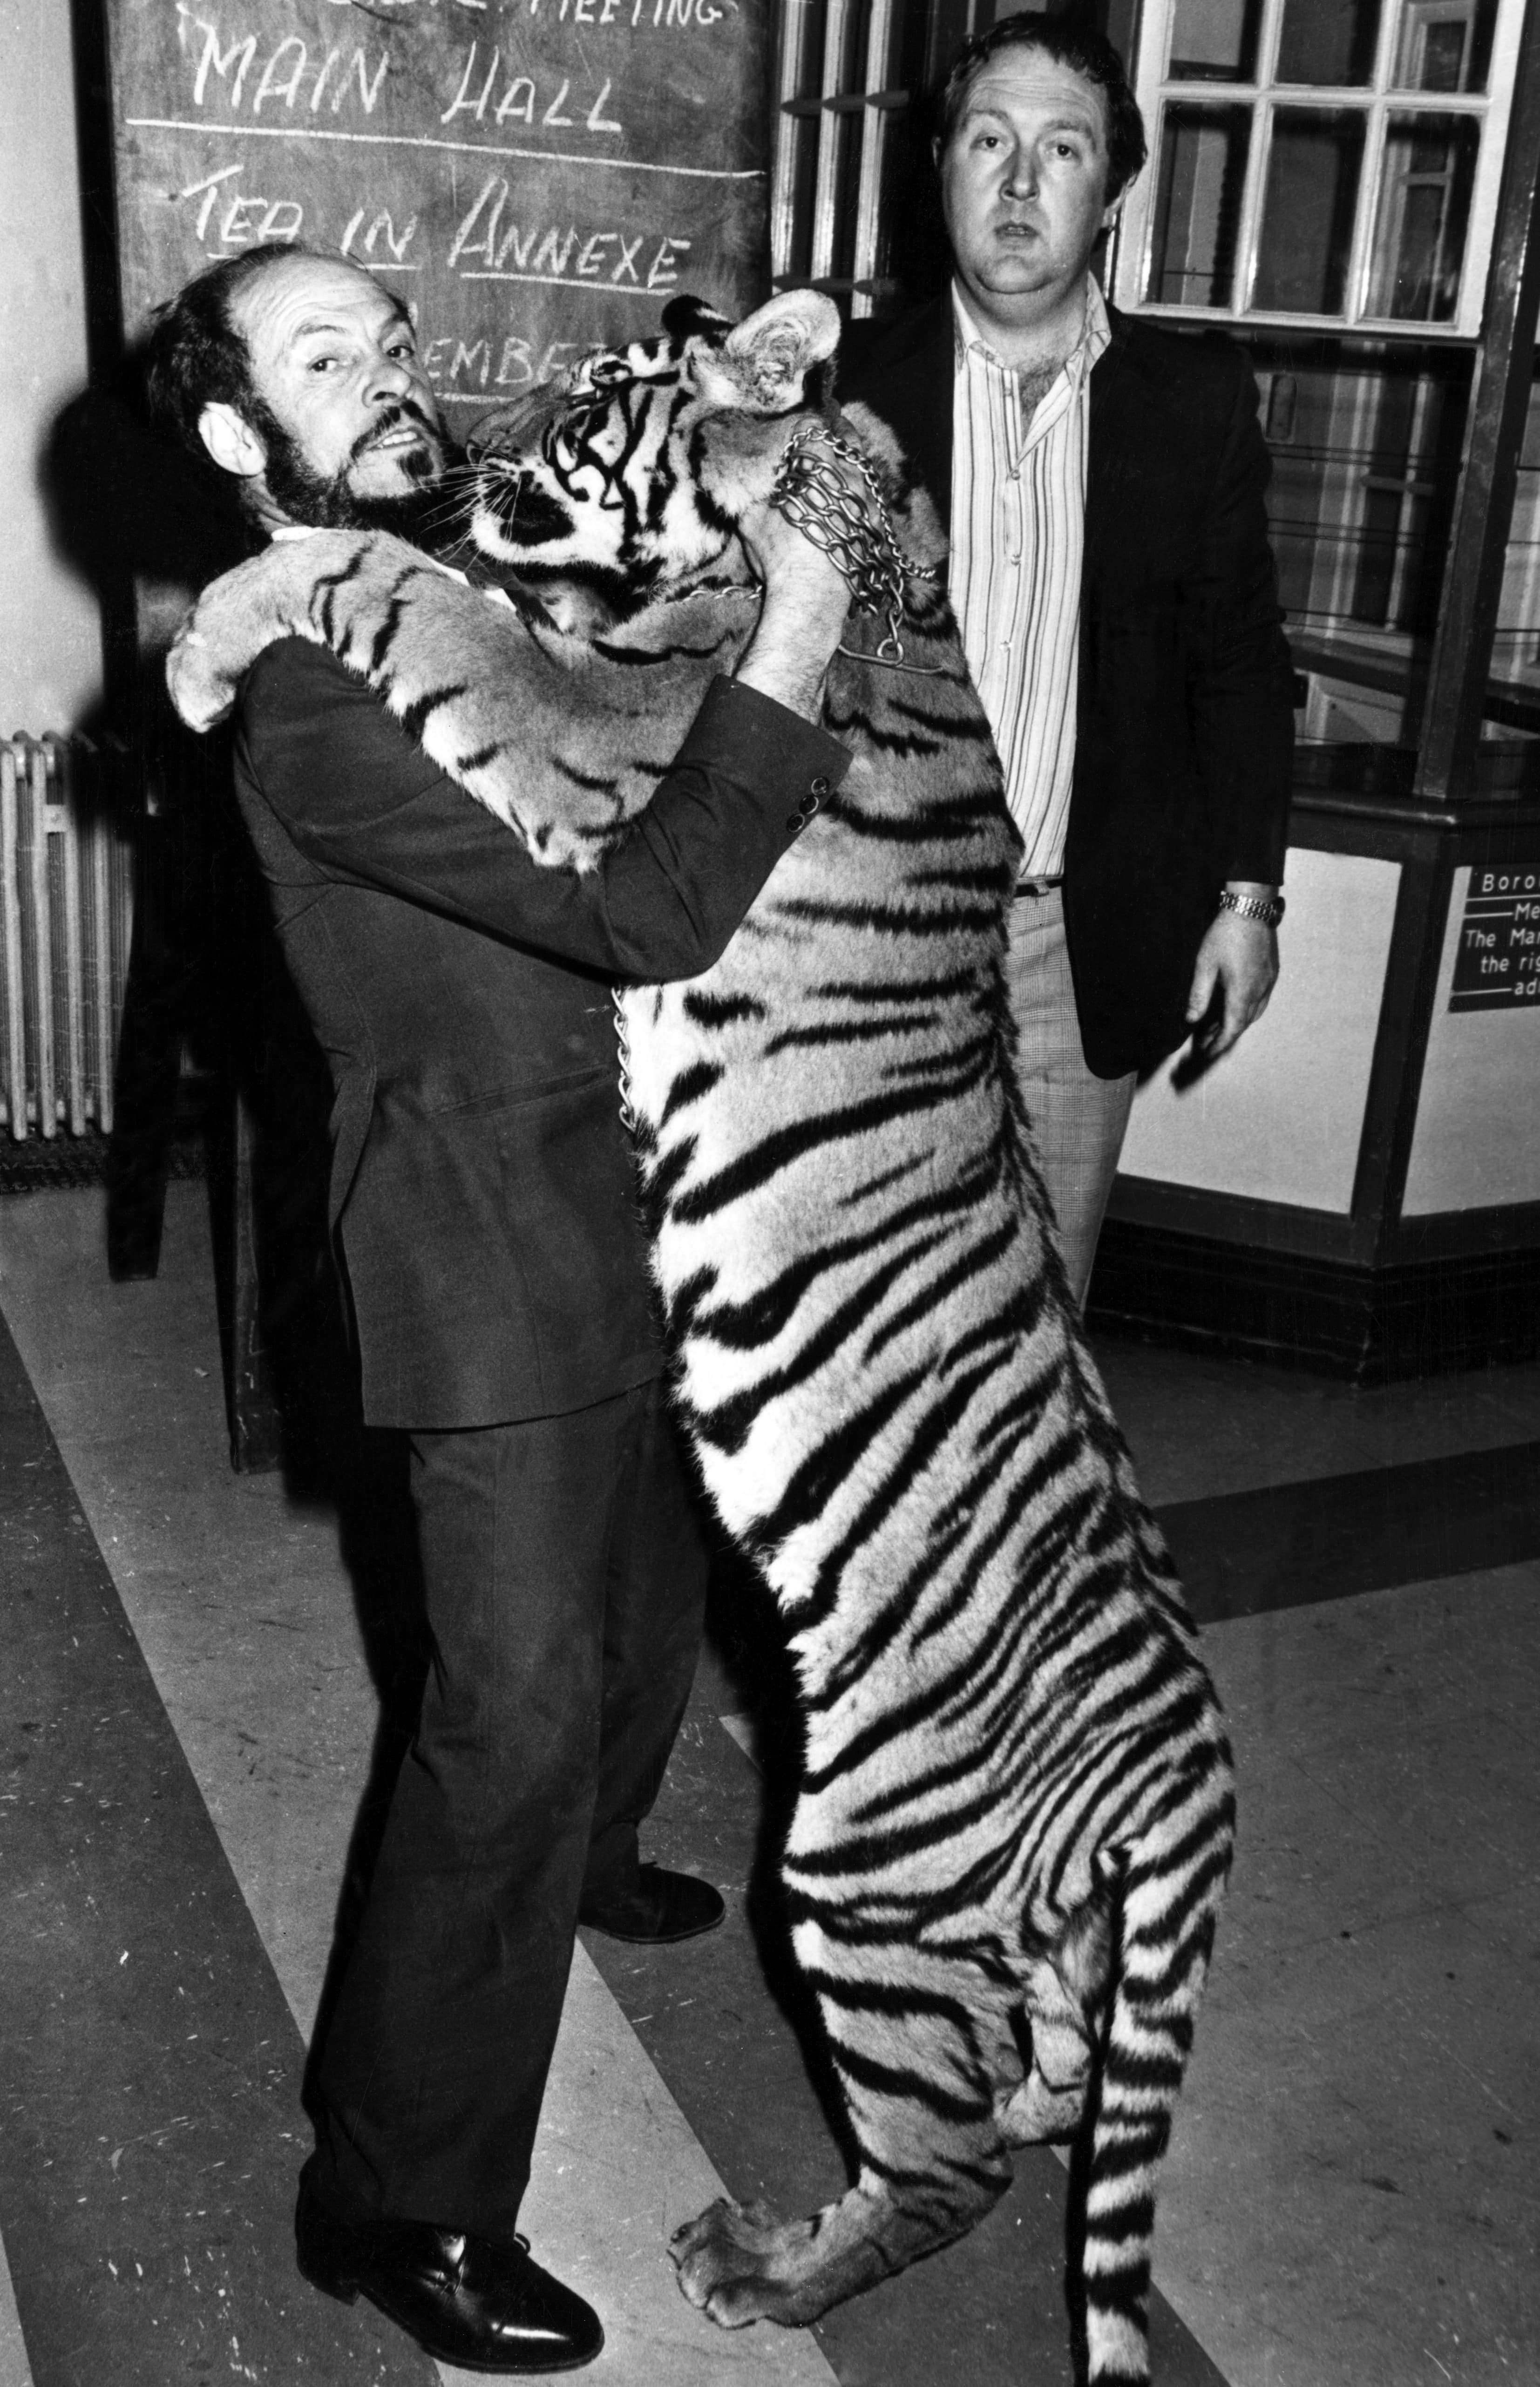 Cardiff Zoo owner Mr George Palmer, took his Bengal tigress Kali to the annual meeting of Vale of Glamorgan Borough Council to publicise a request for financial backing. He was later fined ¿20 by the town's magistrates and bound over in the sum of ¿50 to keep the peace for a year. Identical twin brothers George and Hugh Palmer ran Barry Zoo, officially called Cardiff Zoo (Barry), but known locally as Barry Zoo. May 1977.